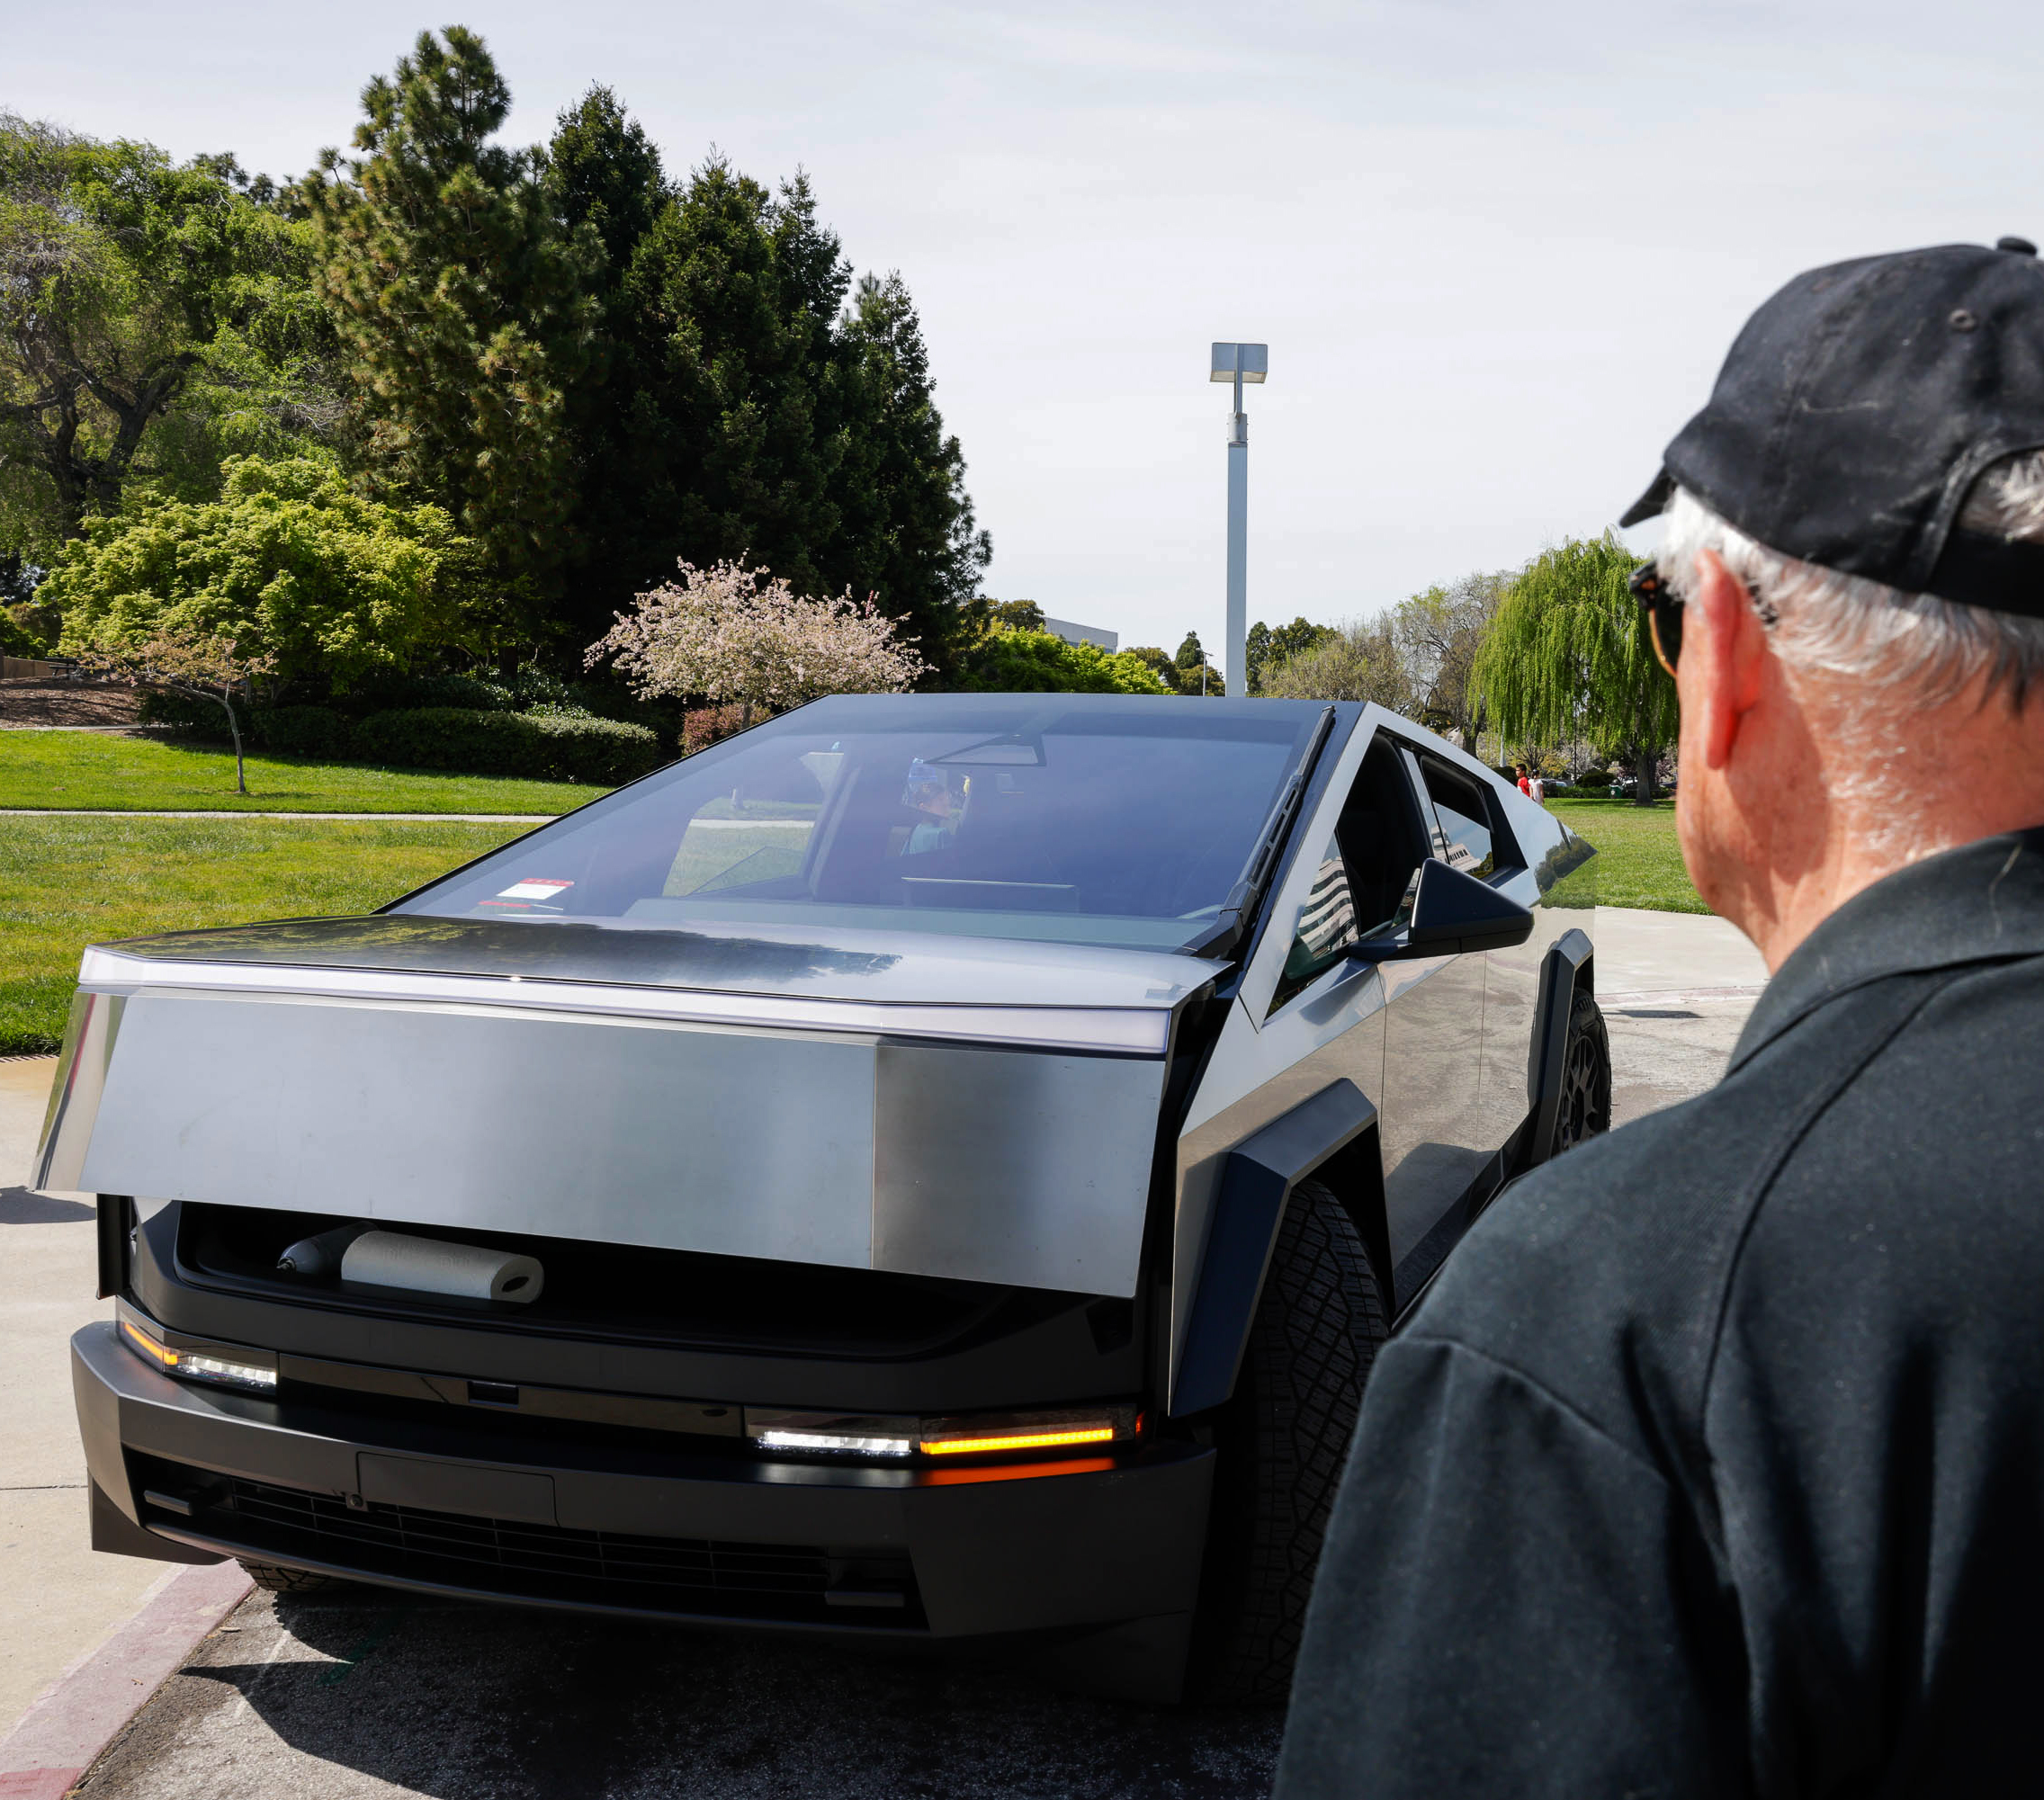 A man in a cap gazes at a silver, angular car with its gull-wing door open, parked outdoors.